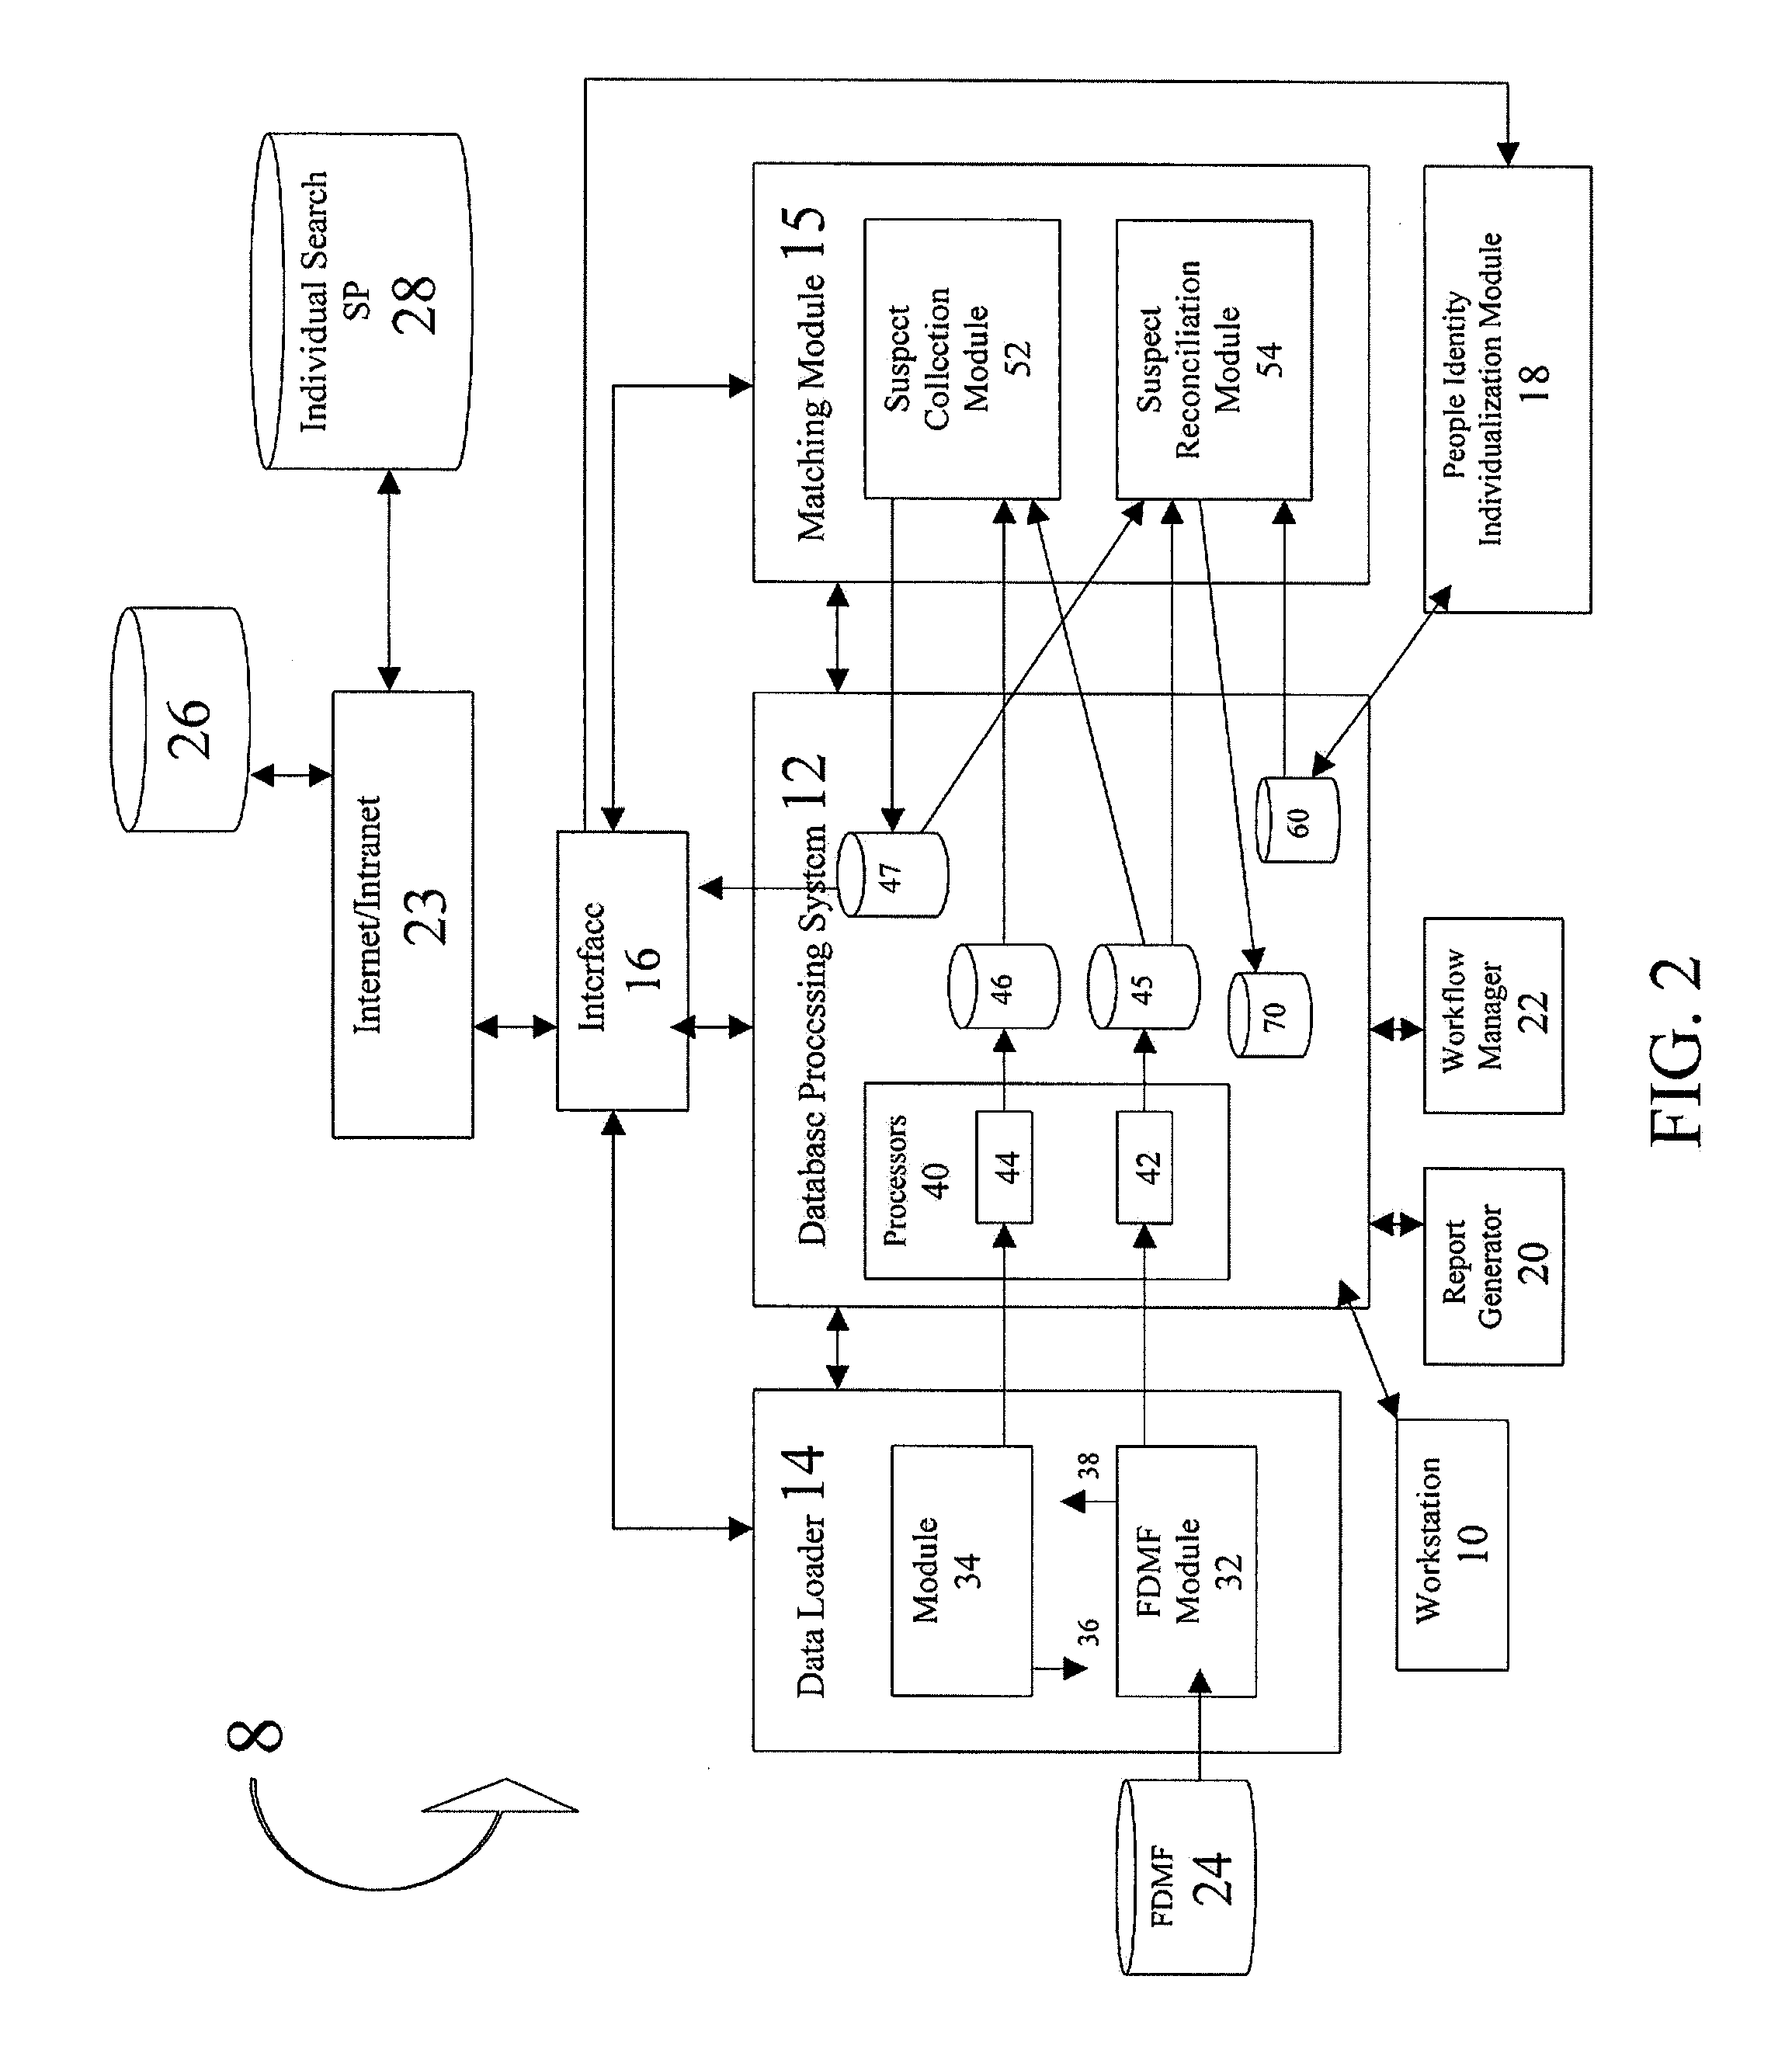 Method and system for uniquely identifying a person to the exclusion of all others